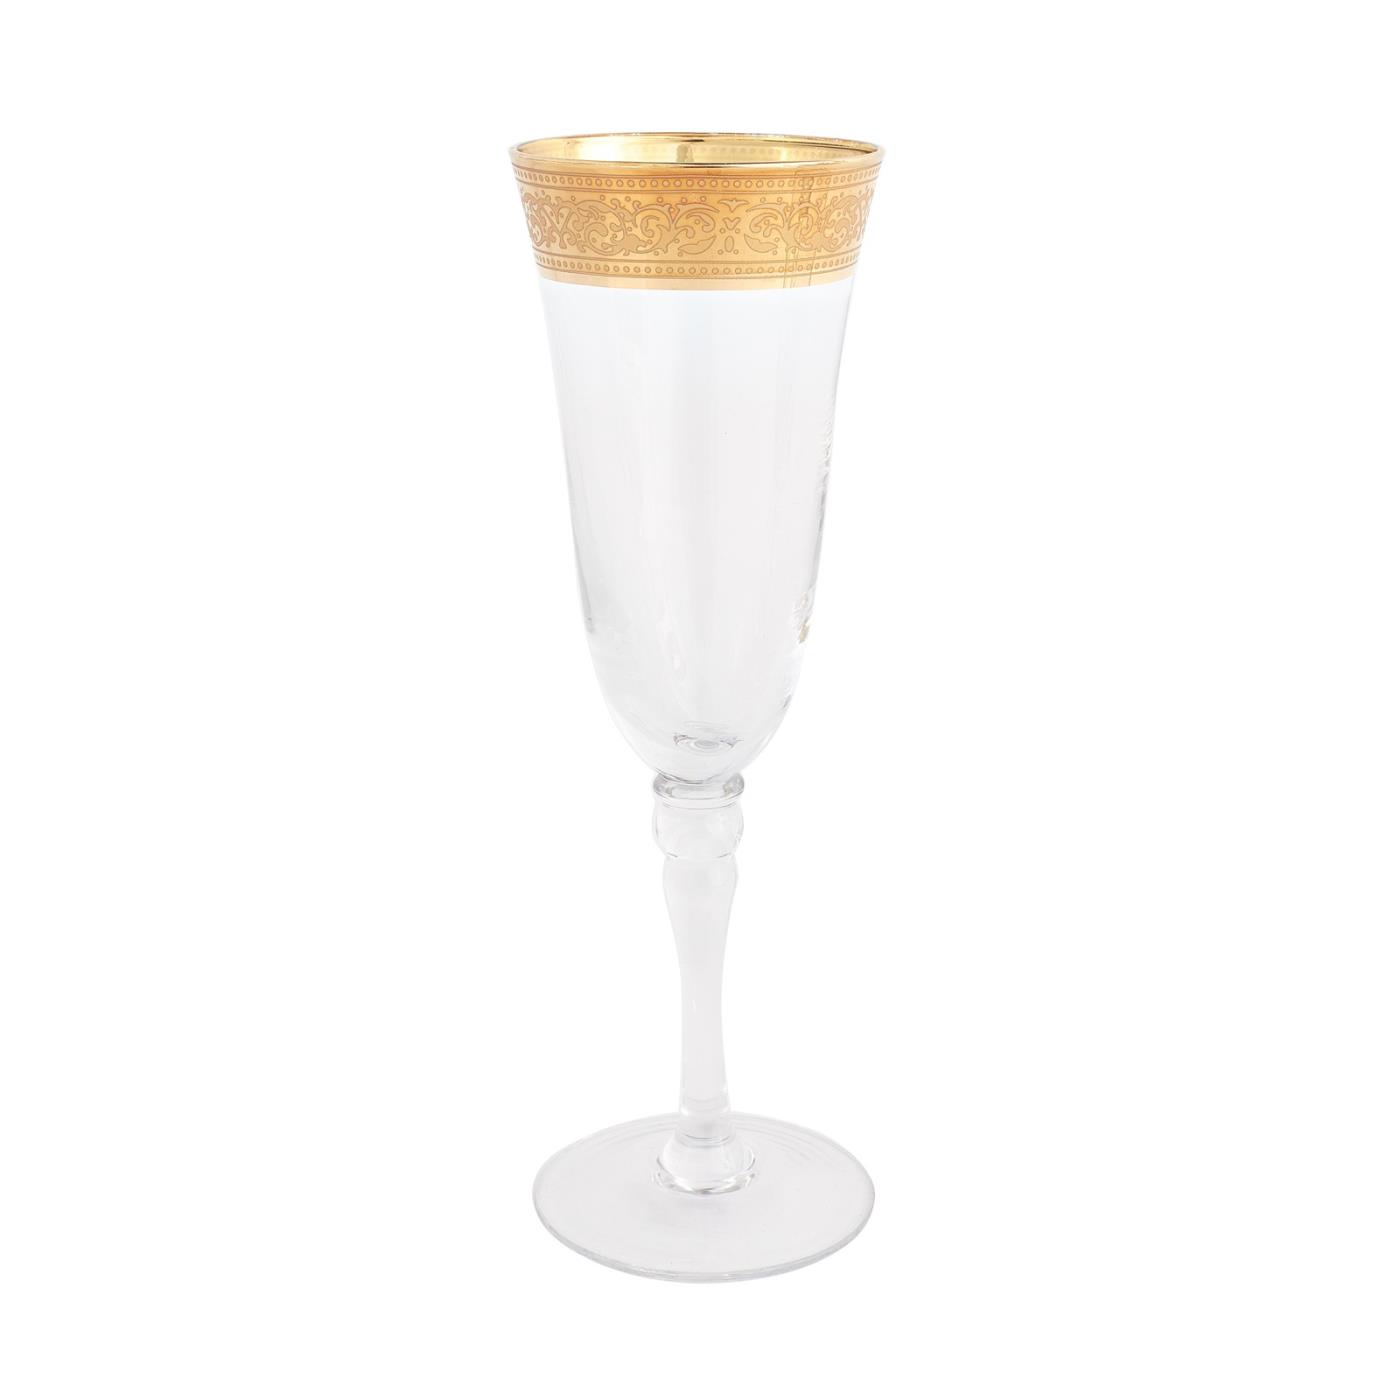 Majestic Gold Collection -  Champagne Flute 7 oz